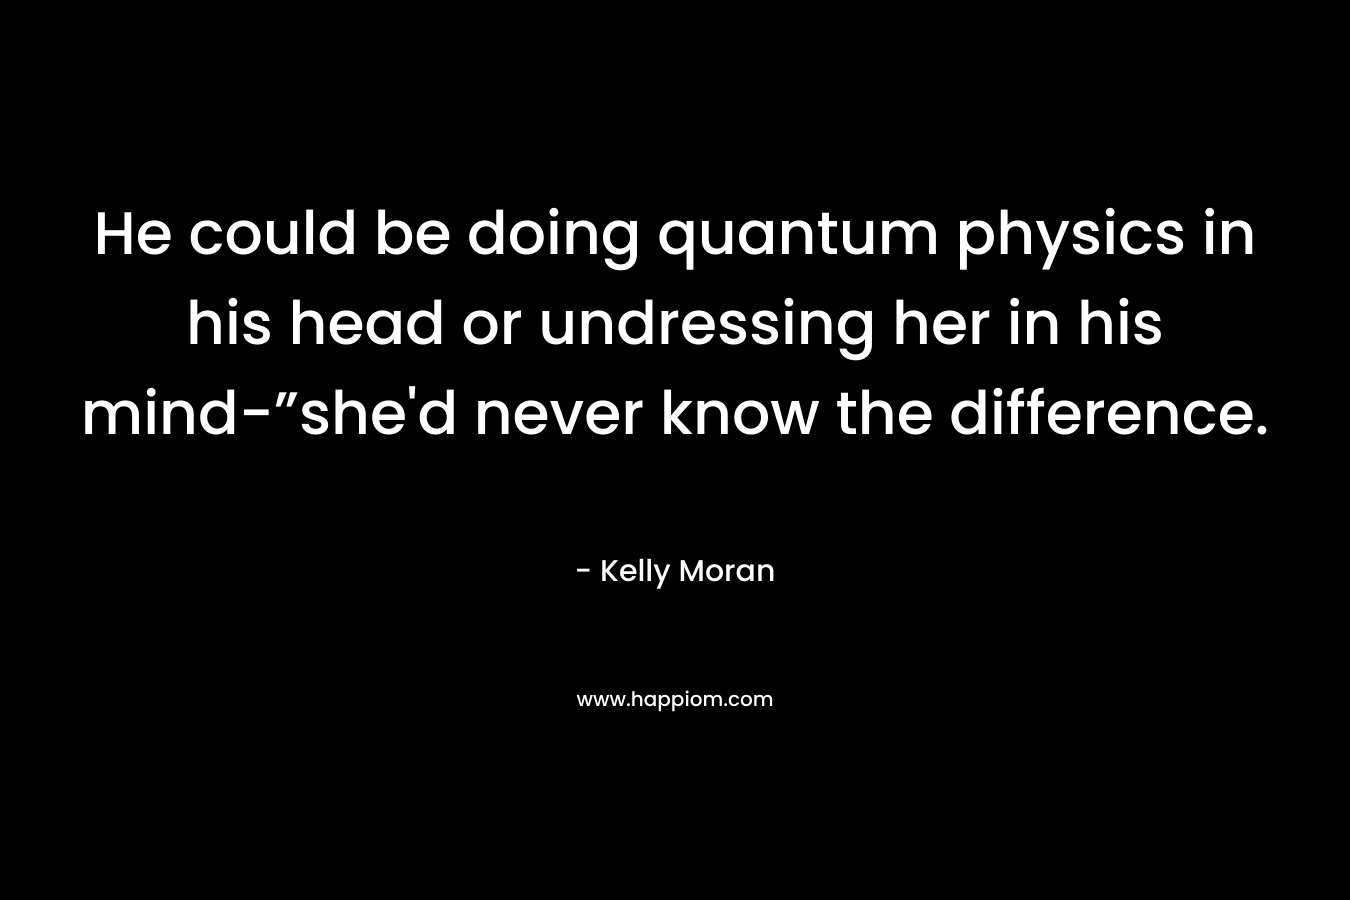 He could be doing quantum physics in his head or undressing her in his mind-”she'd never know the difference.